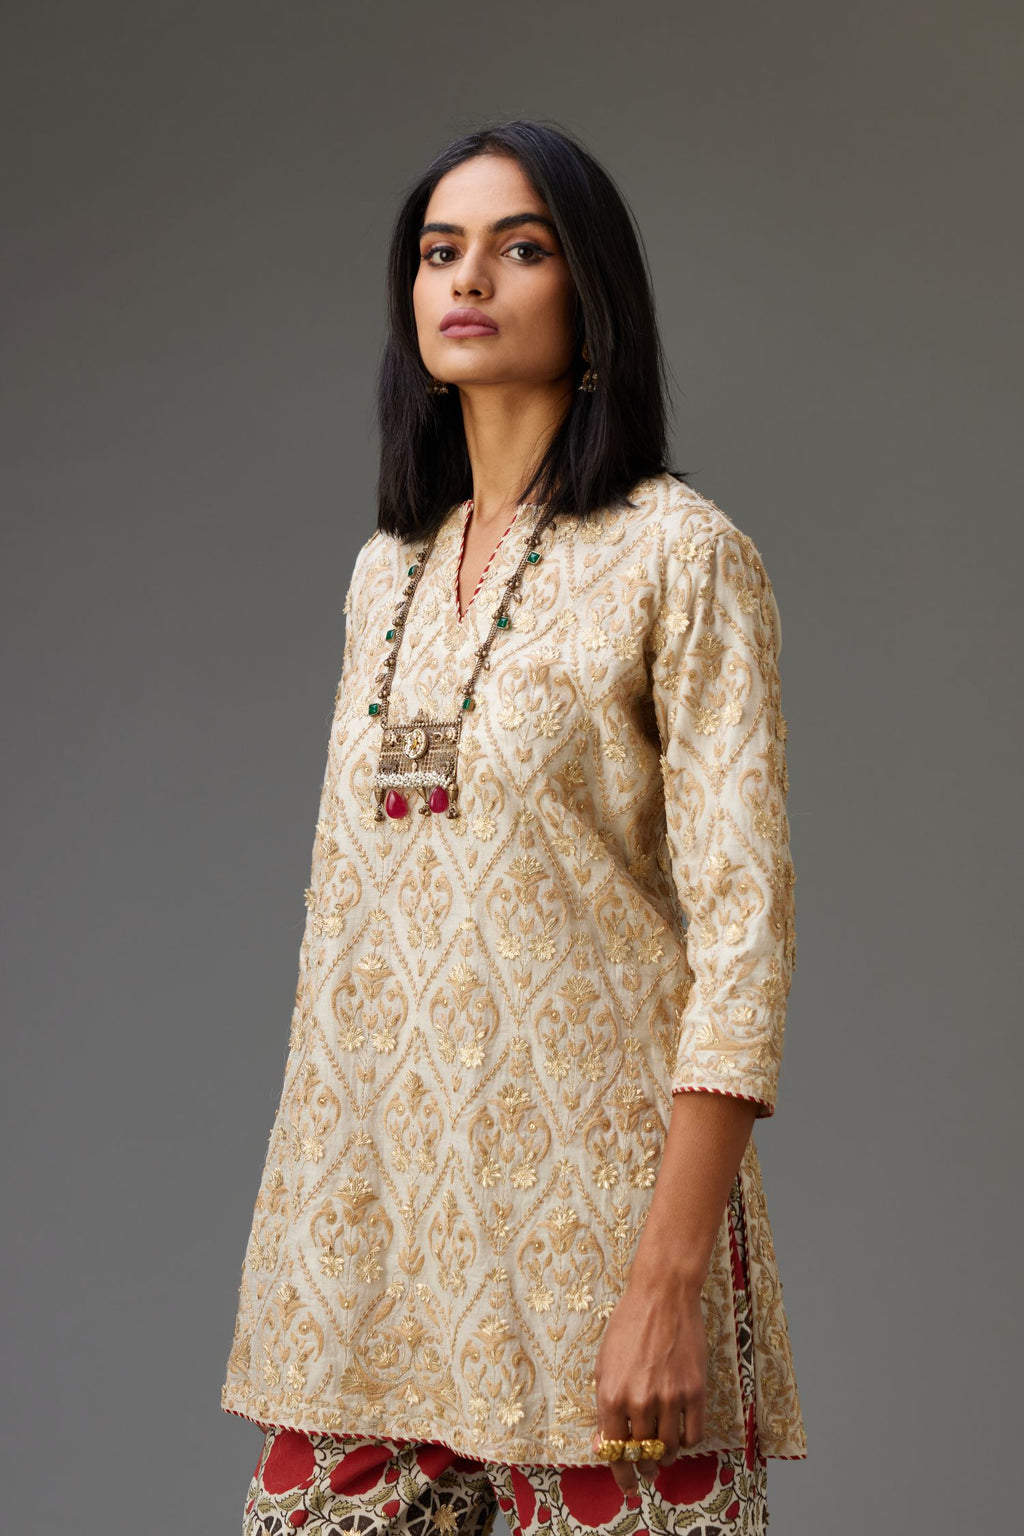 Off-white short kurta set detailed with all-over dori, sequins and gota embroidery.